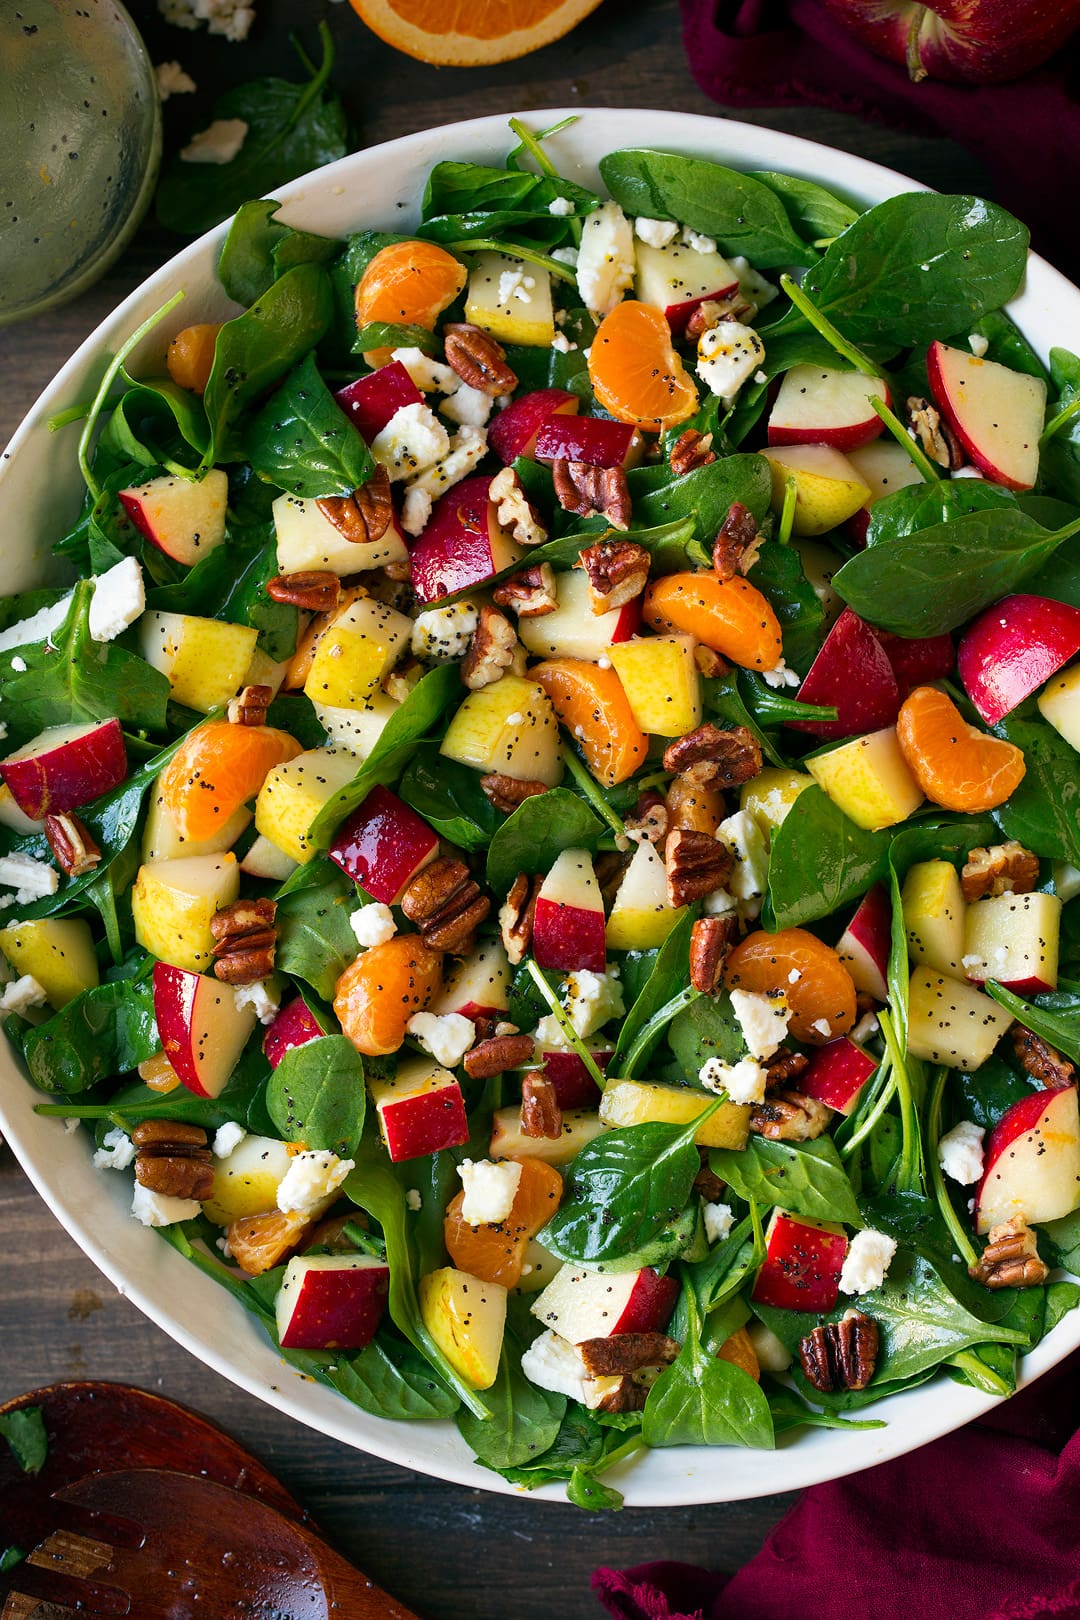 Autumn Spinach Salad with Orange Poppy Dressing - Cooking Classy